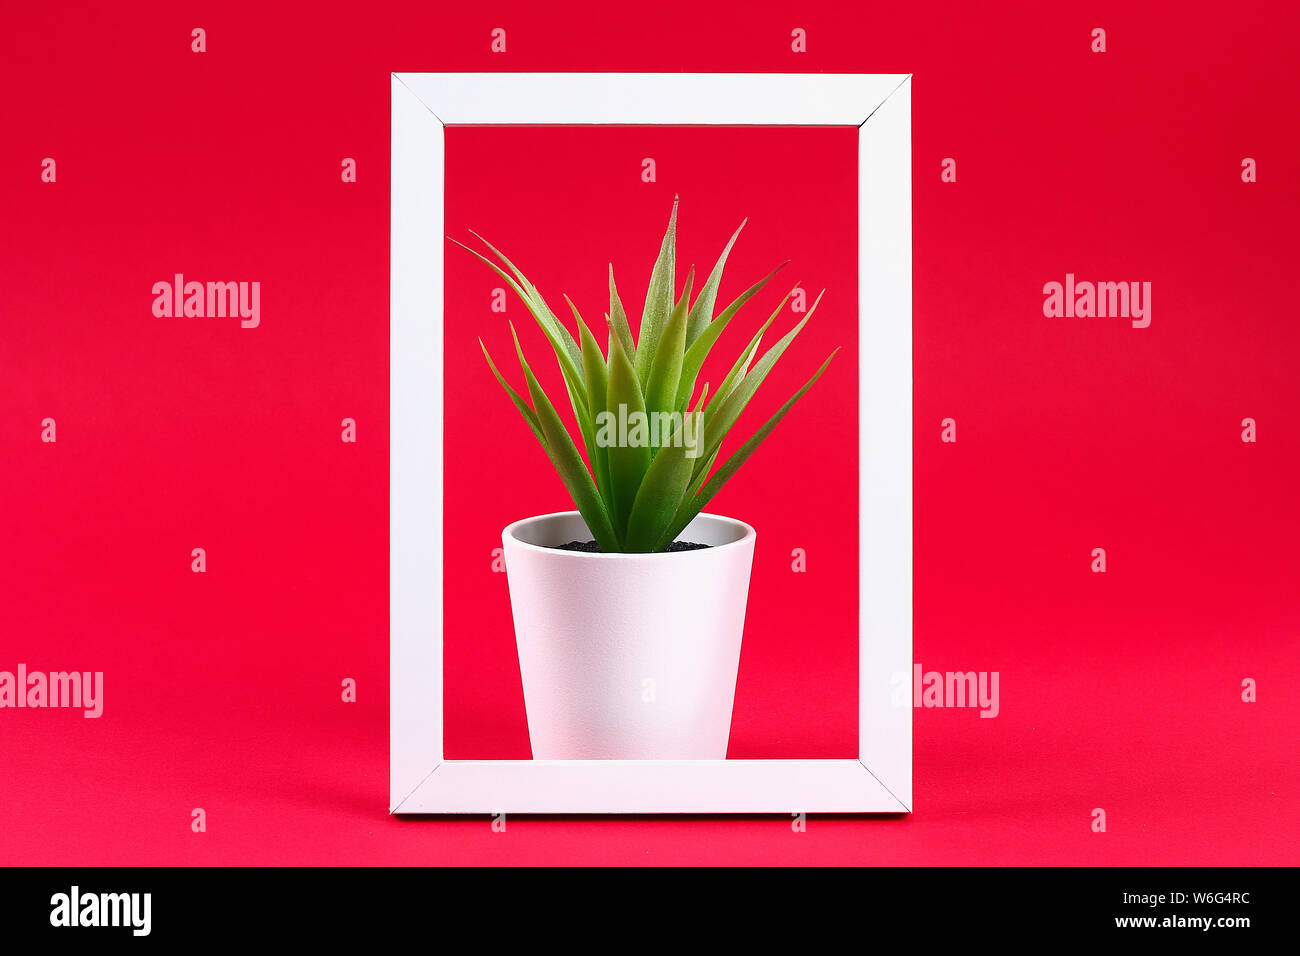 Artificial green grass in a white small pot in a white frame on a red burgundy background. Stock Photo